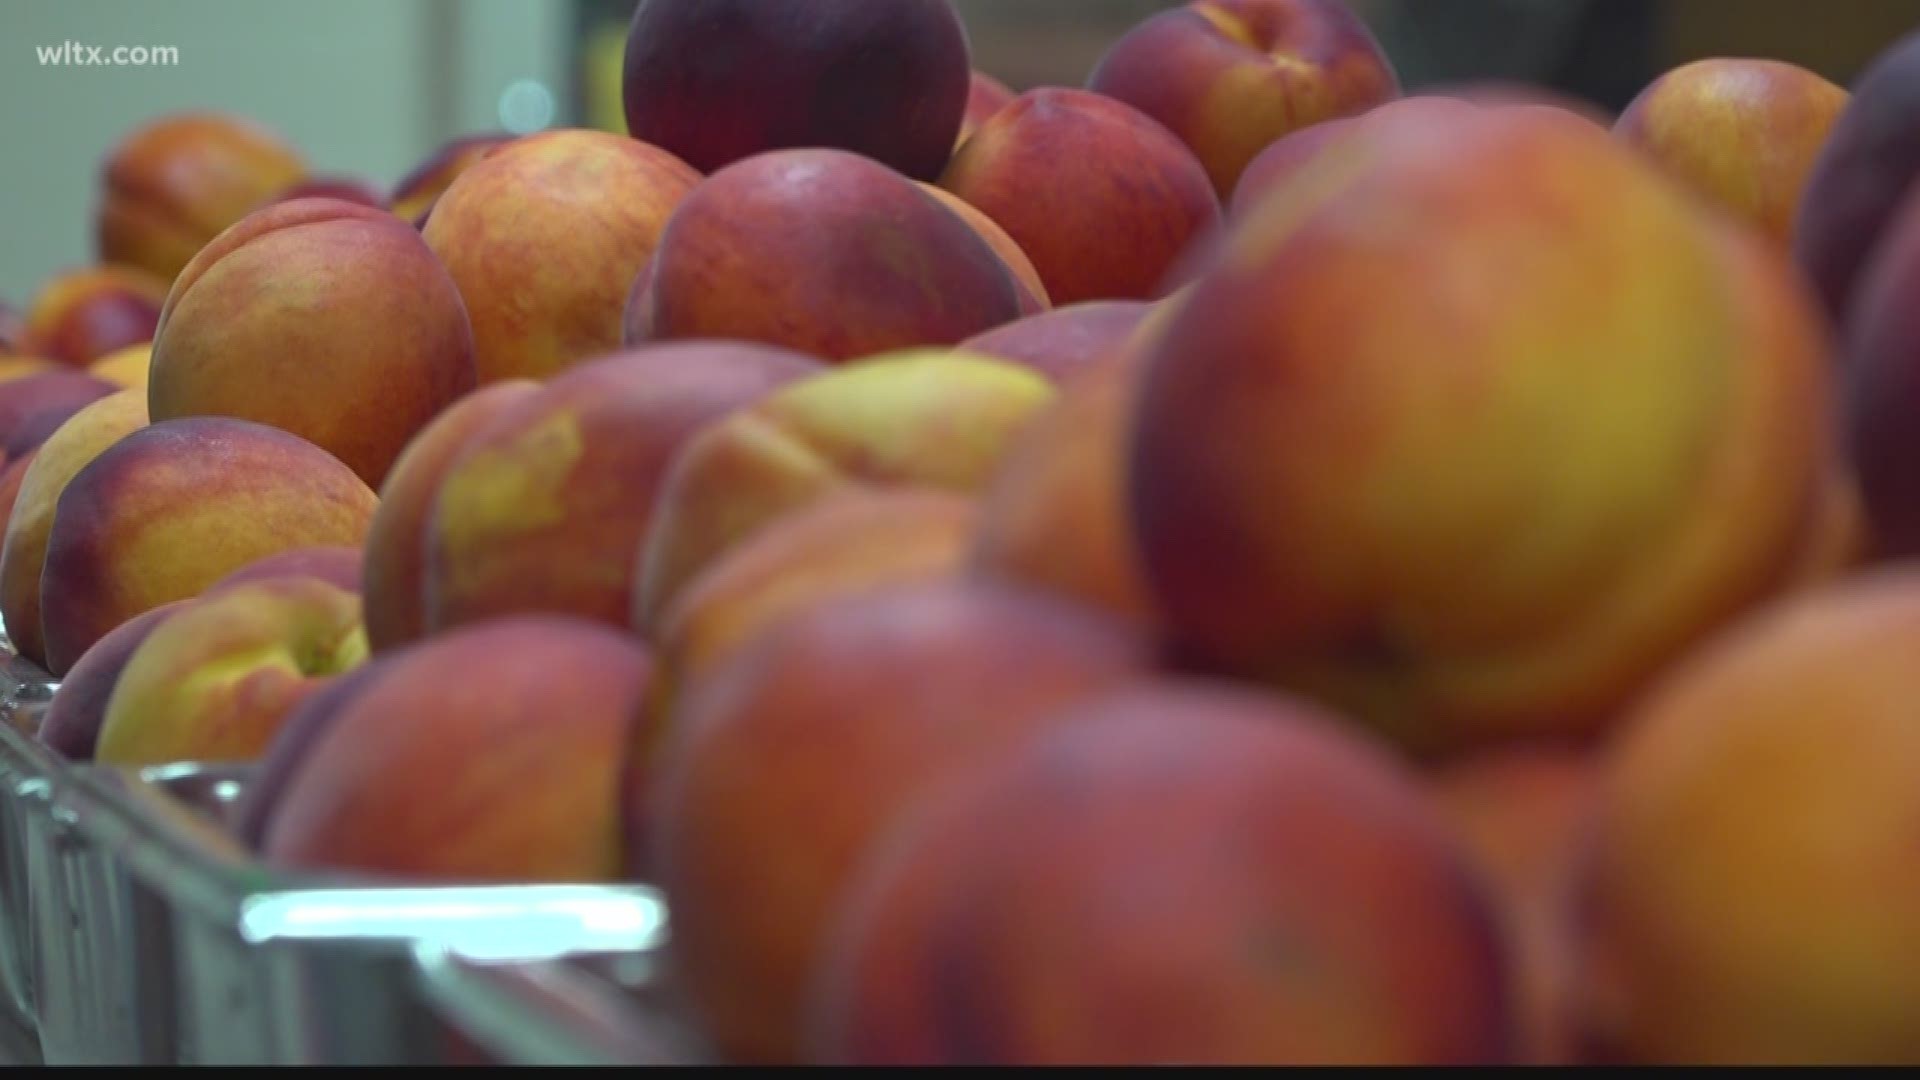 The town is hosting it's 60th anniversary peach festival, with one of the best peach crops in years.